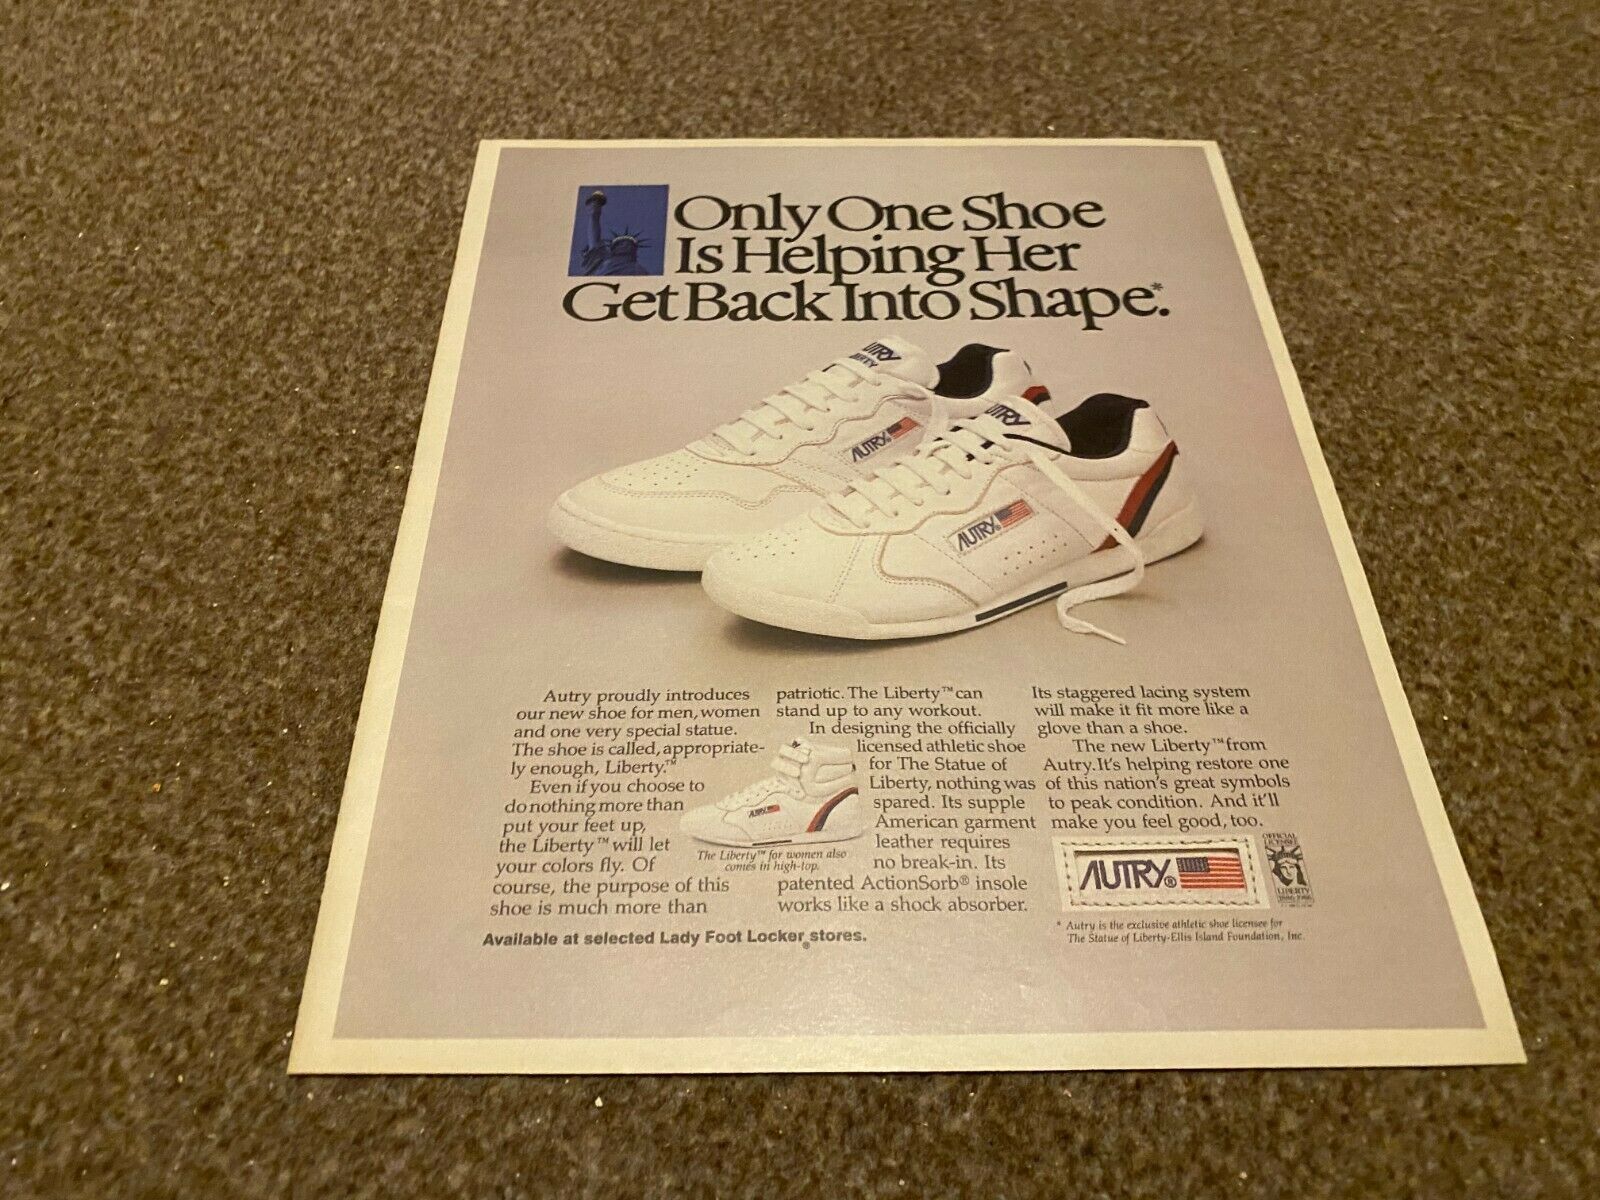 RSBK8 ADVERT 12X10" AUTRY SHOES, BOOTS & TRAINERS AT LADY FOOT LOCKER STORES